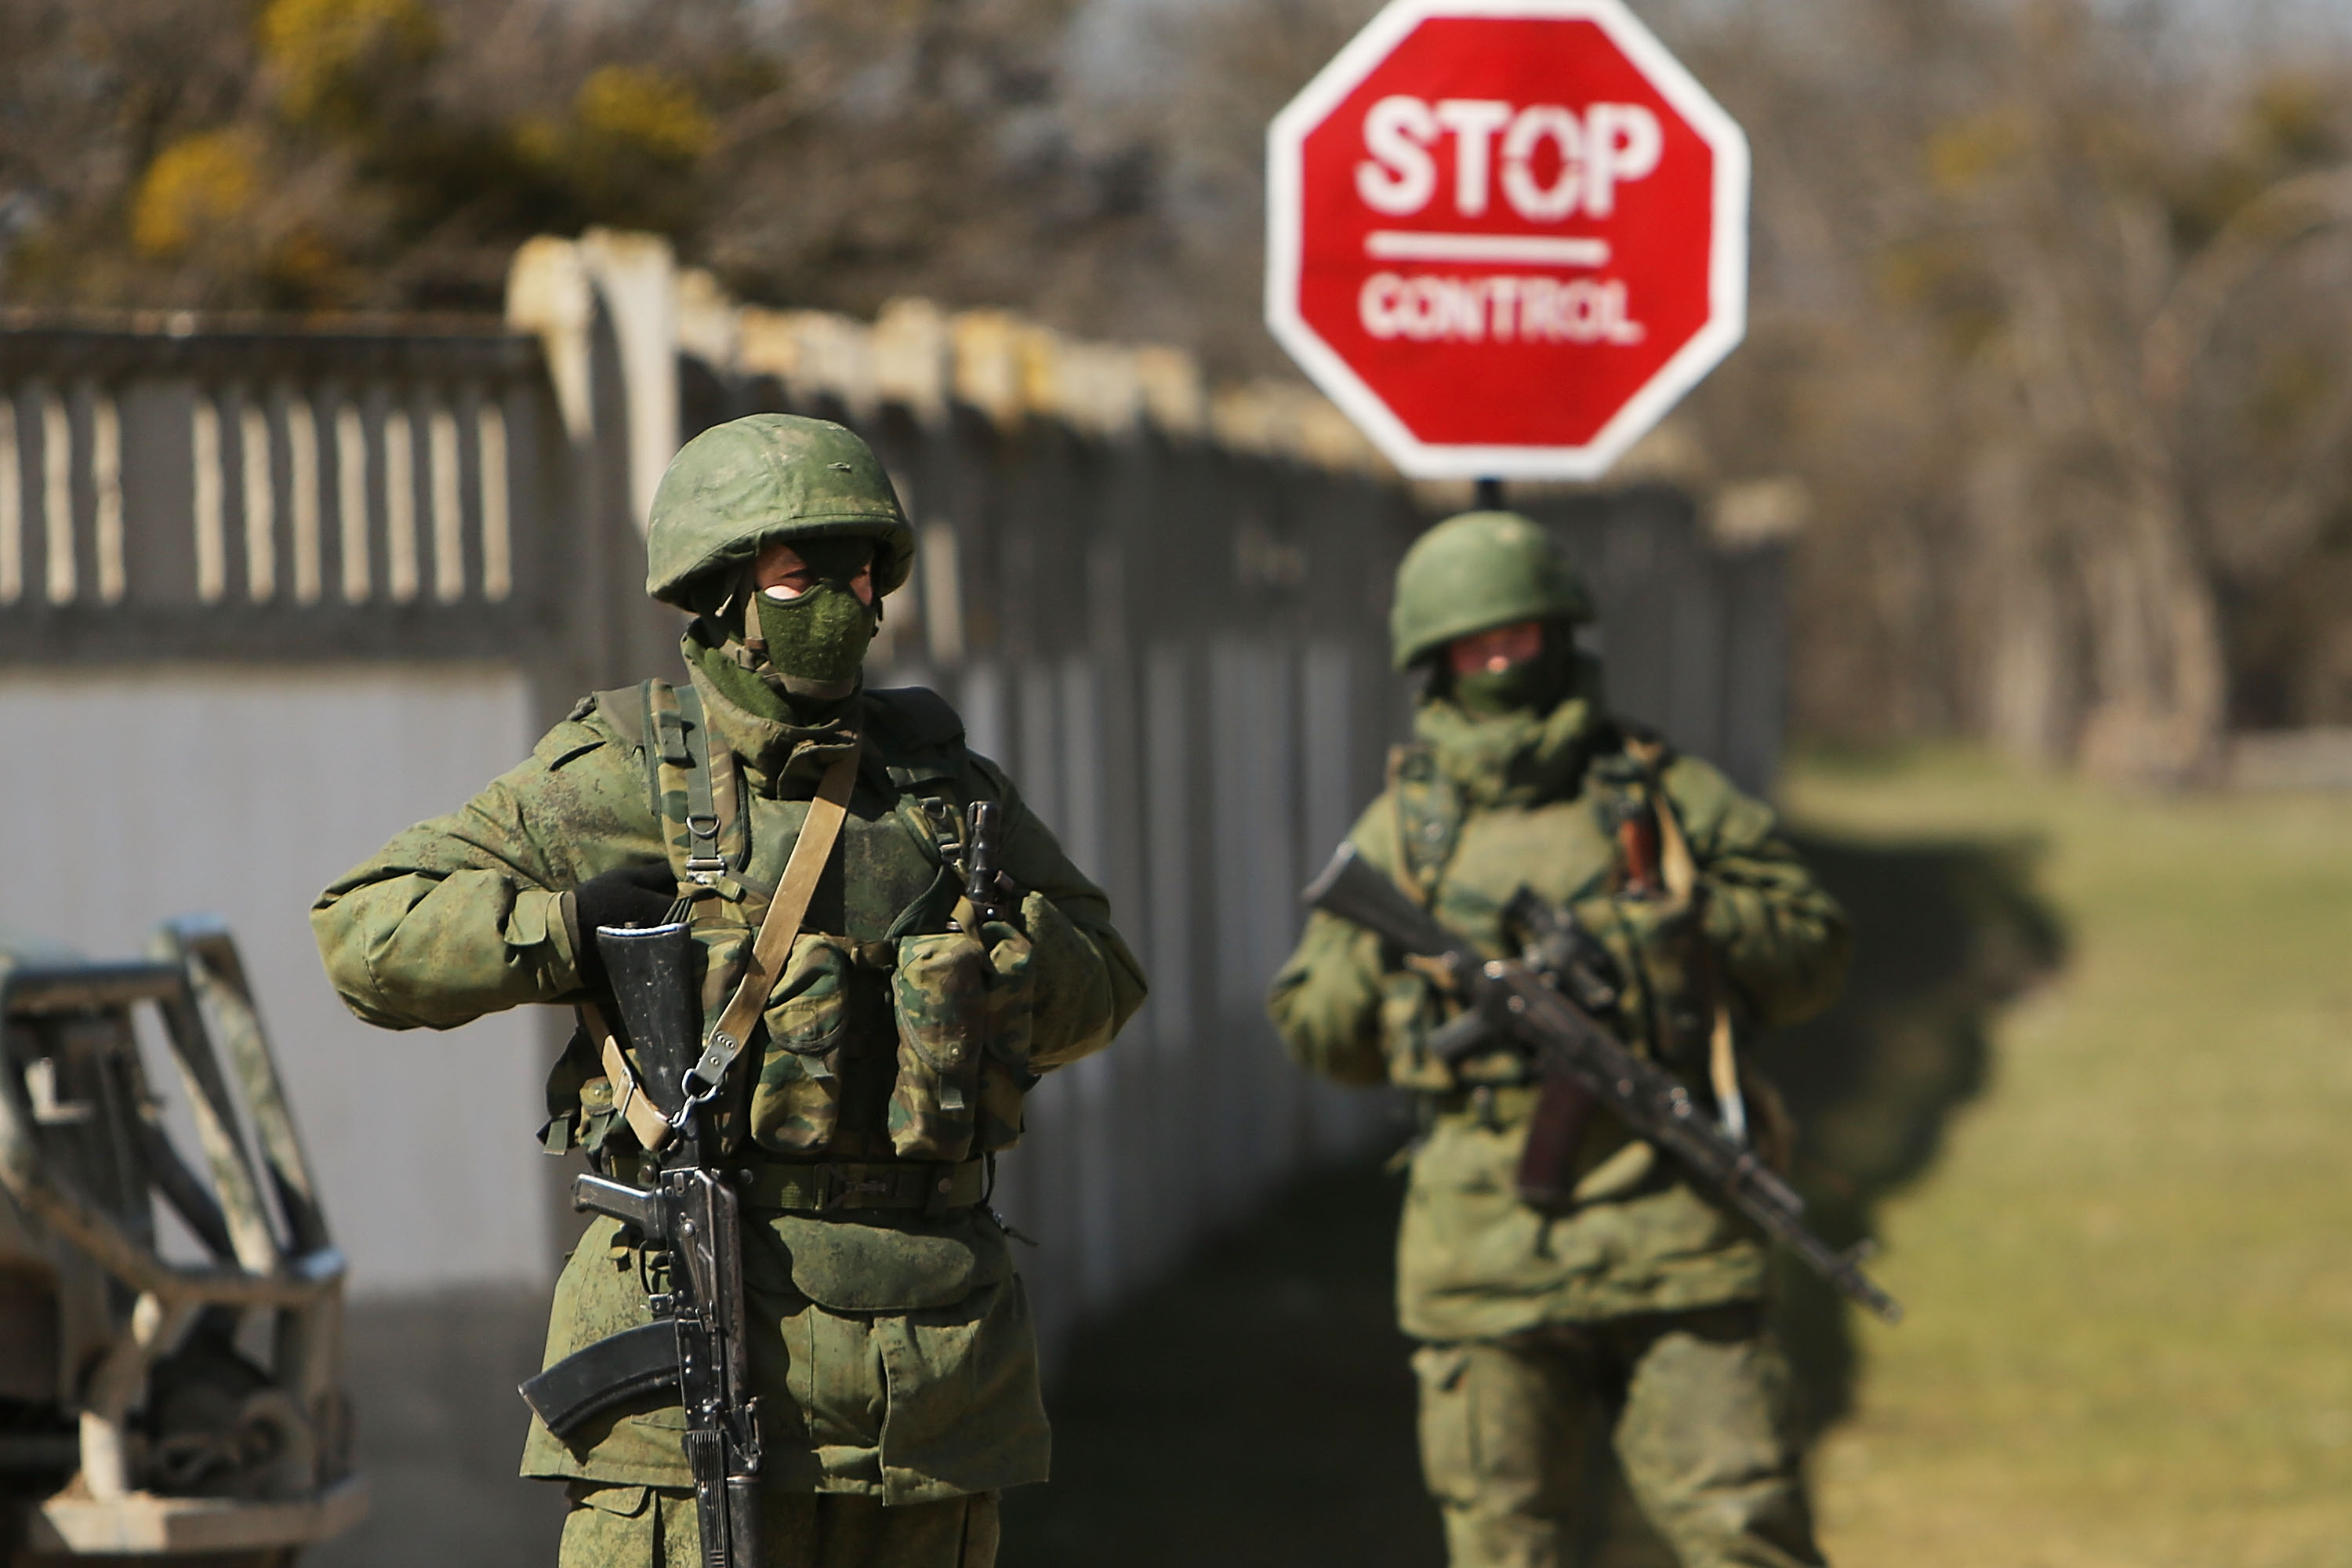 Ukraine is pulling its troops from Crimea, bowing to Russian reality